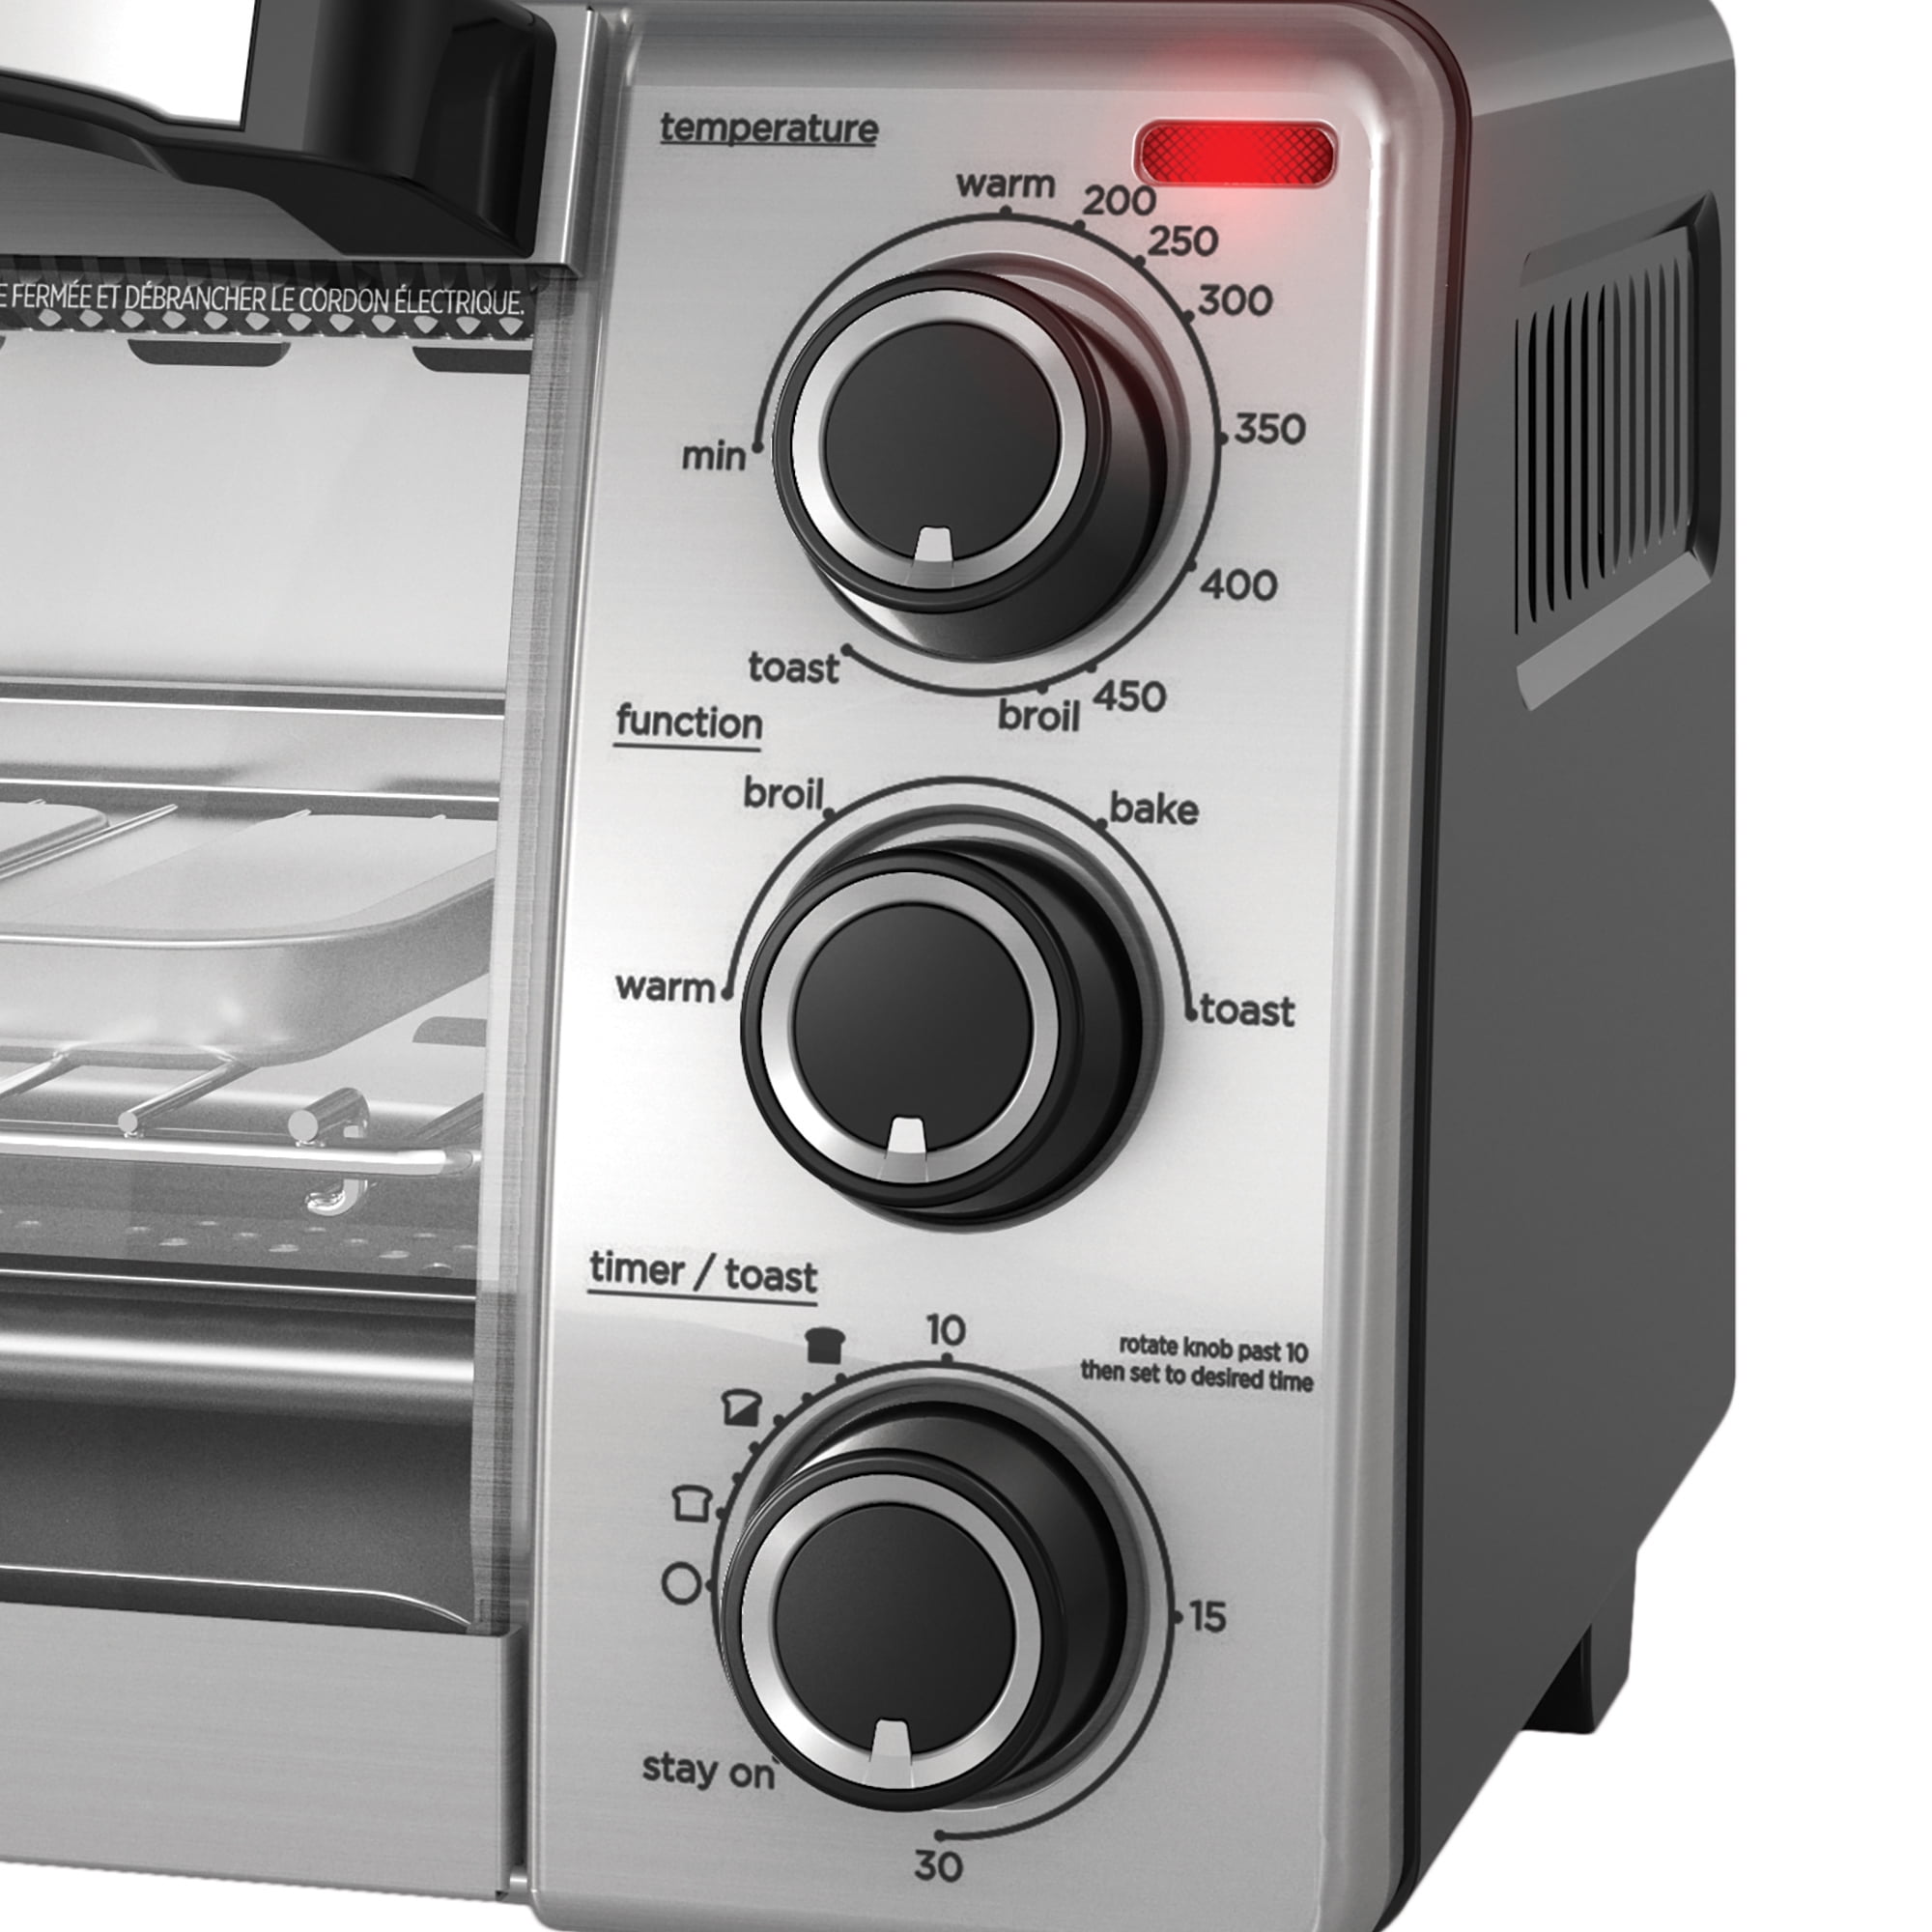 BLACK+DECKER Natural Convection Toaster Oven, Stainless Steel, TO1755SB 